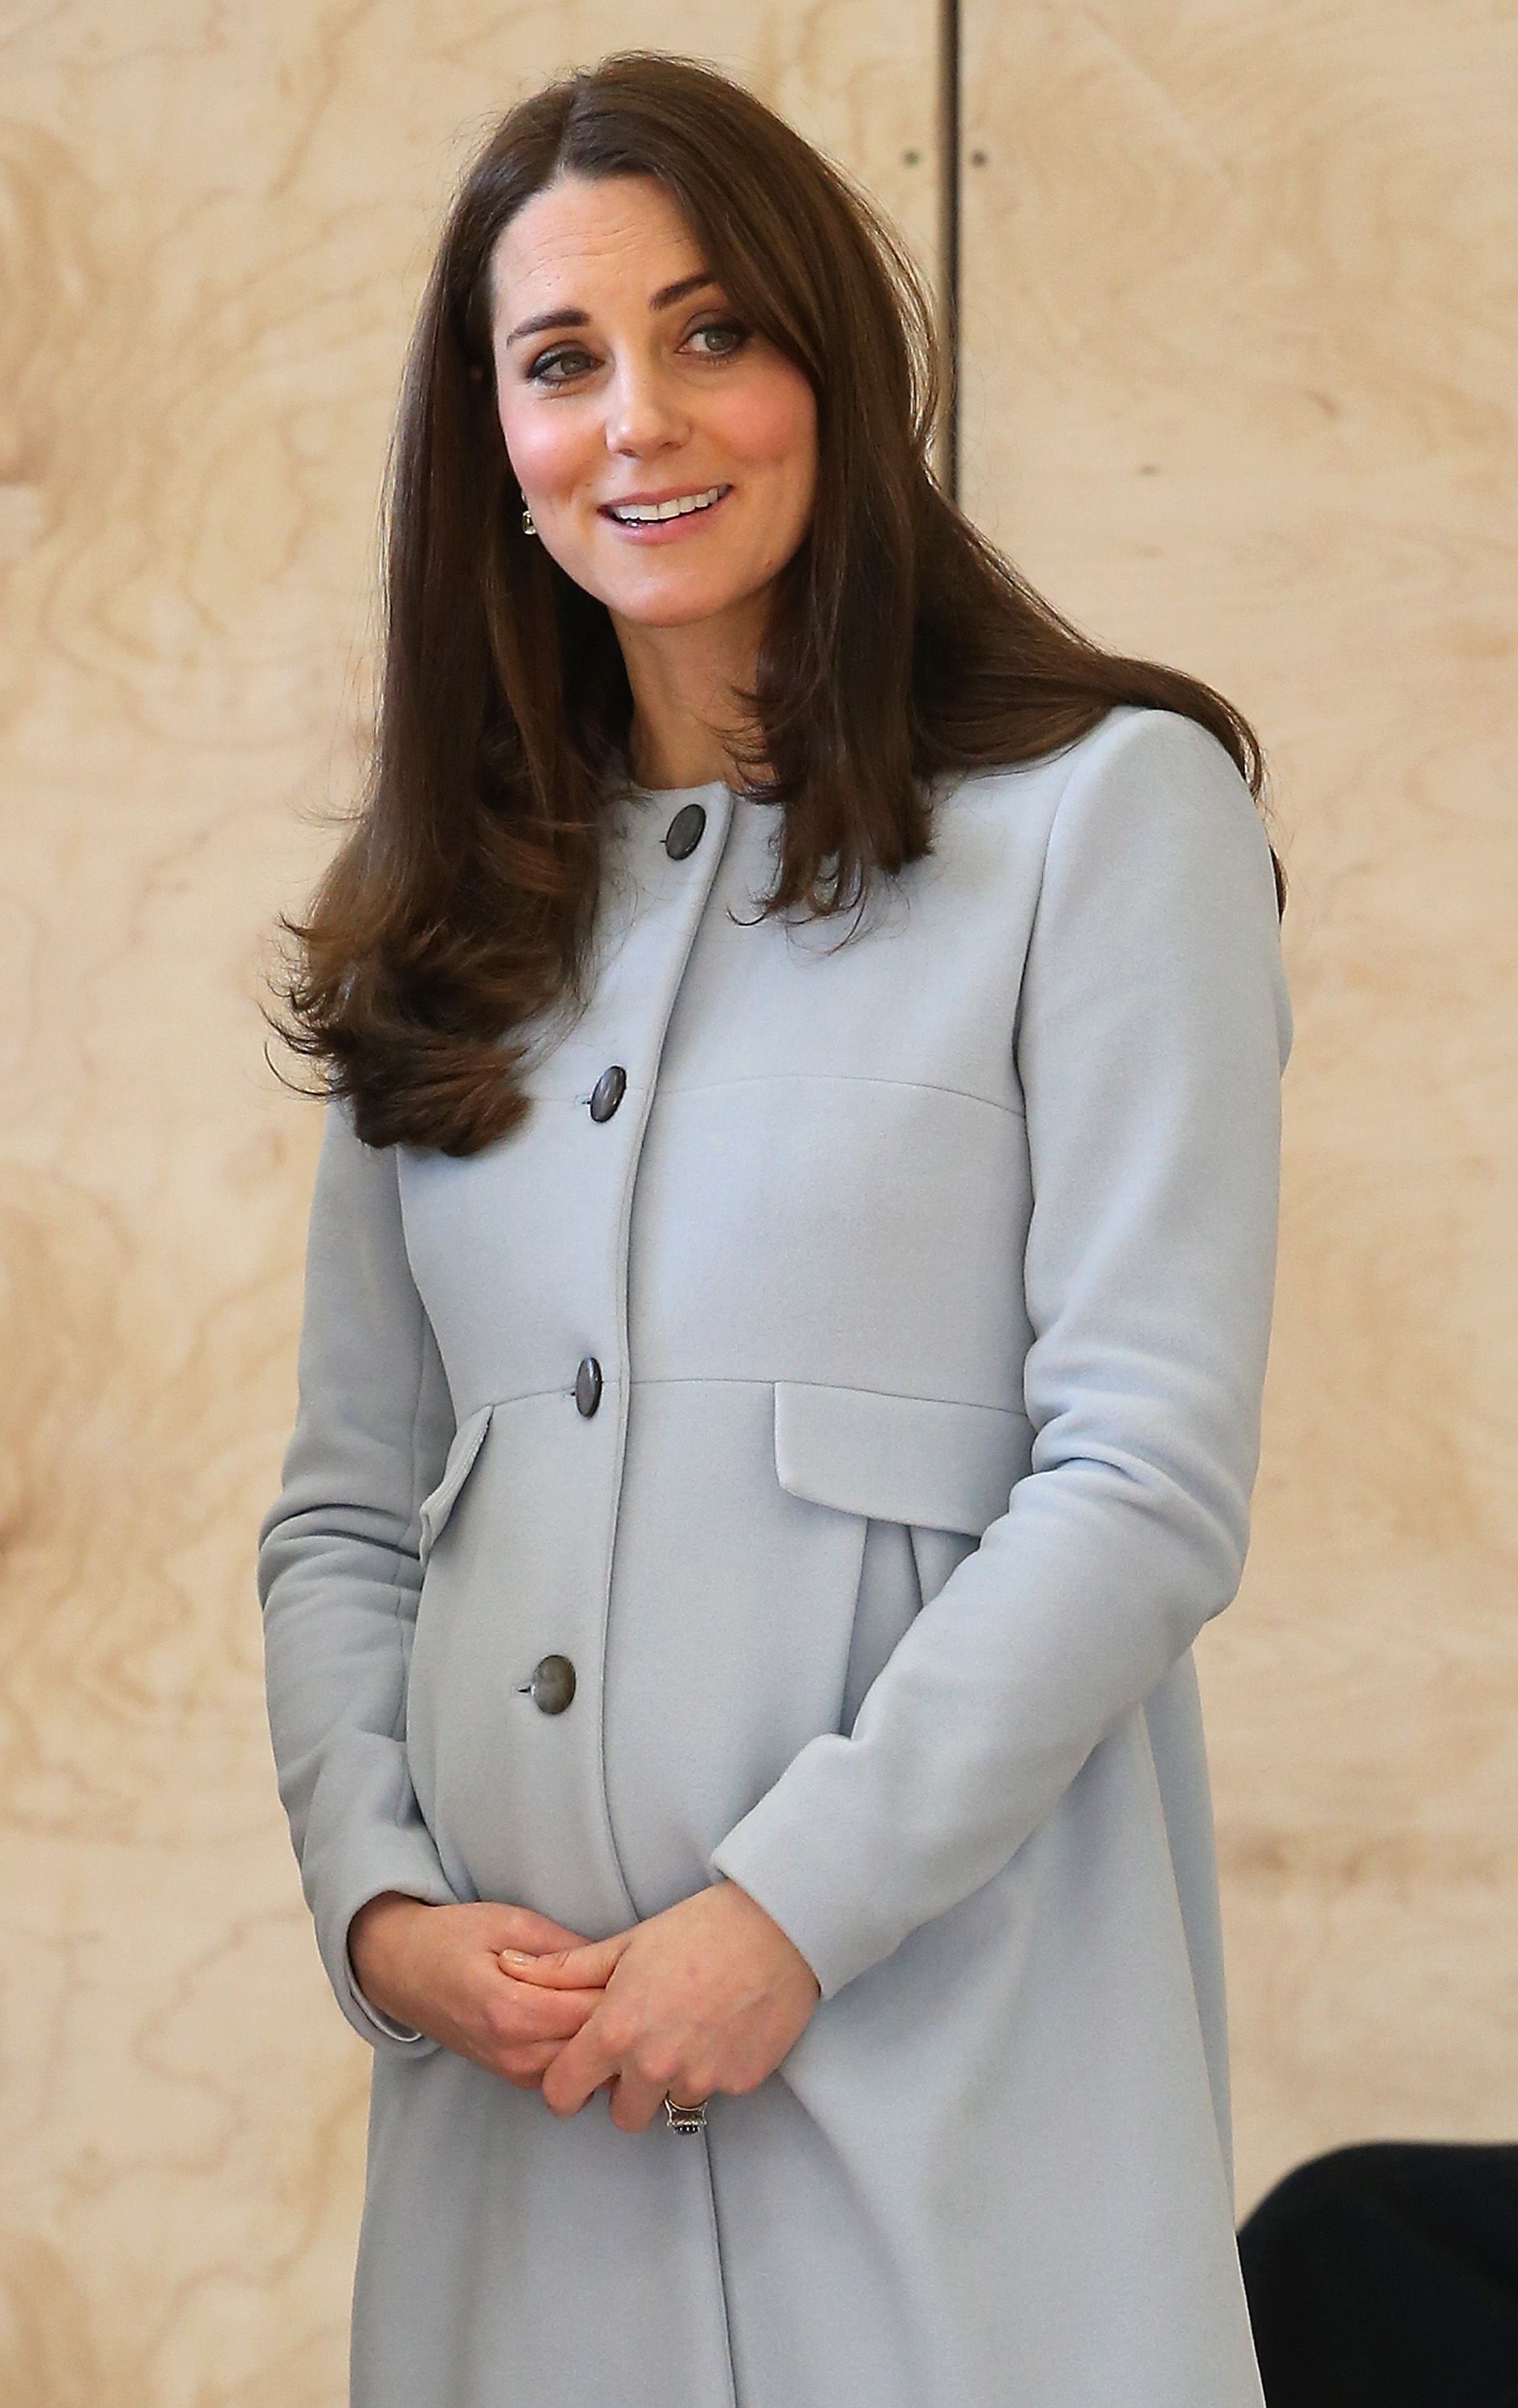 Kate Middleton Reveals She Can Feel The Royal Baby Kicking While ...